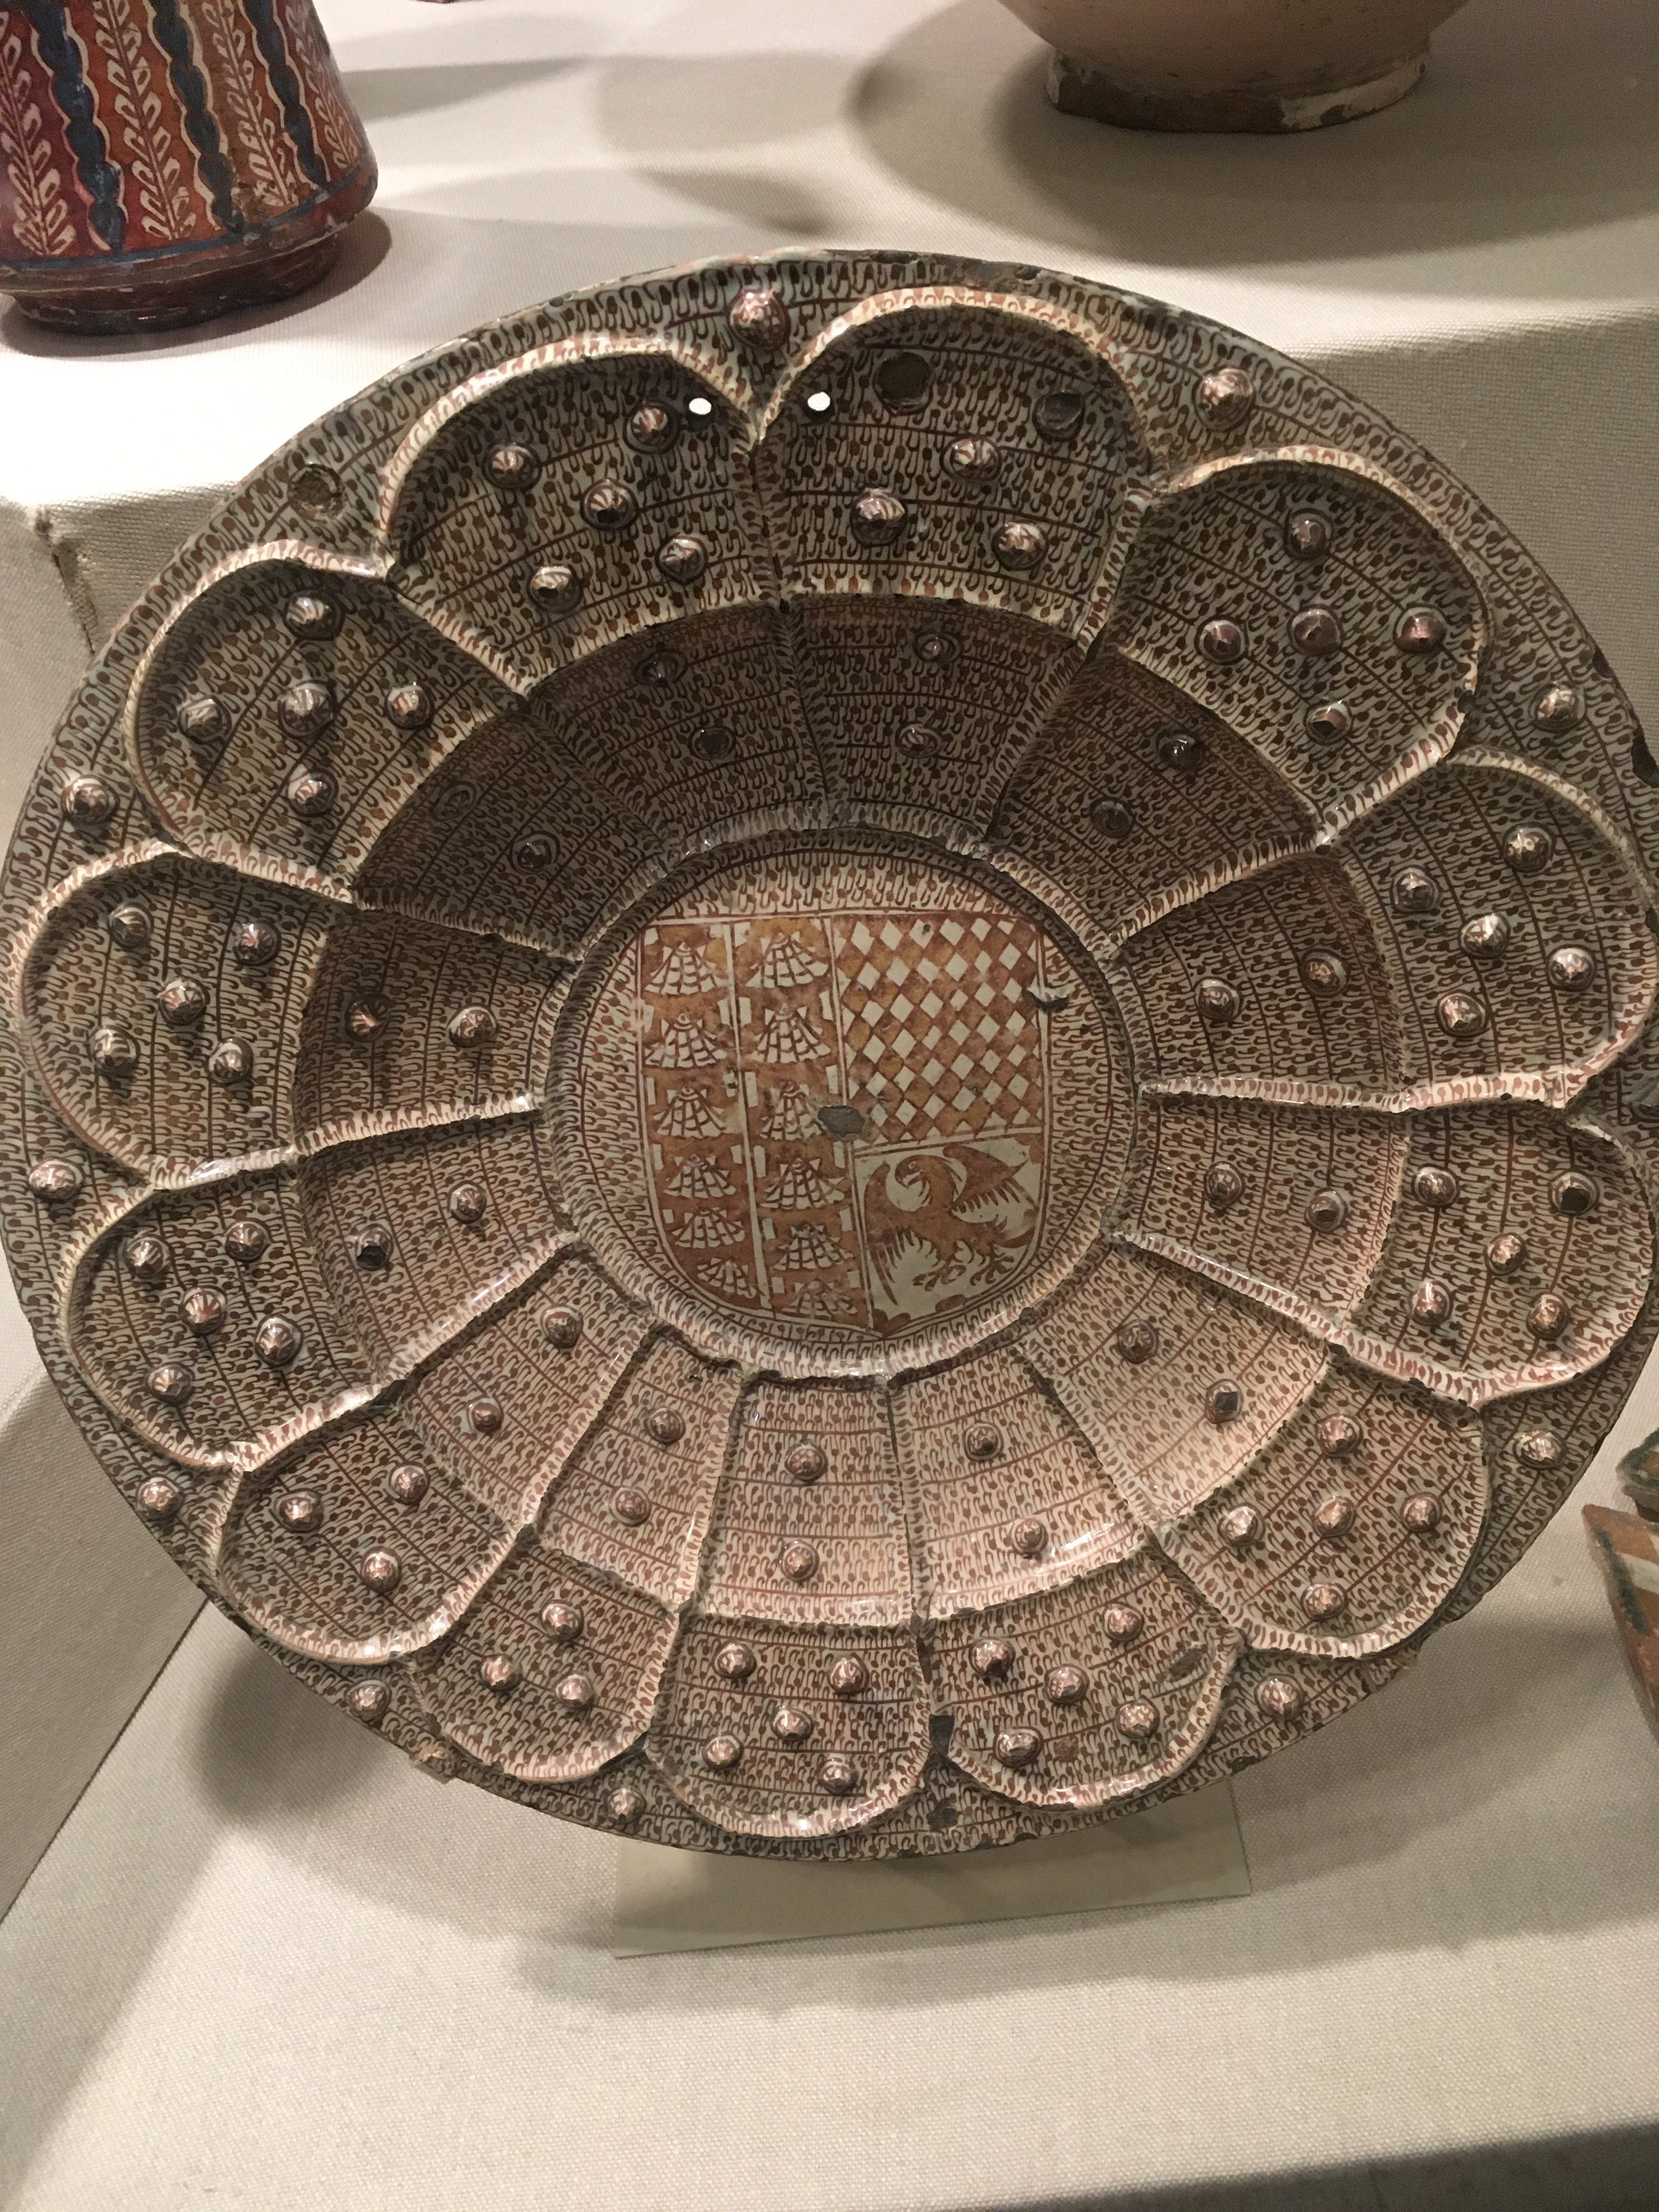 An inlaid plate from Spain with a copper luster and a family shield in the center.